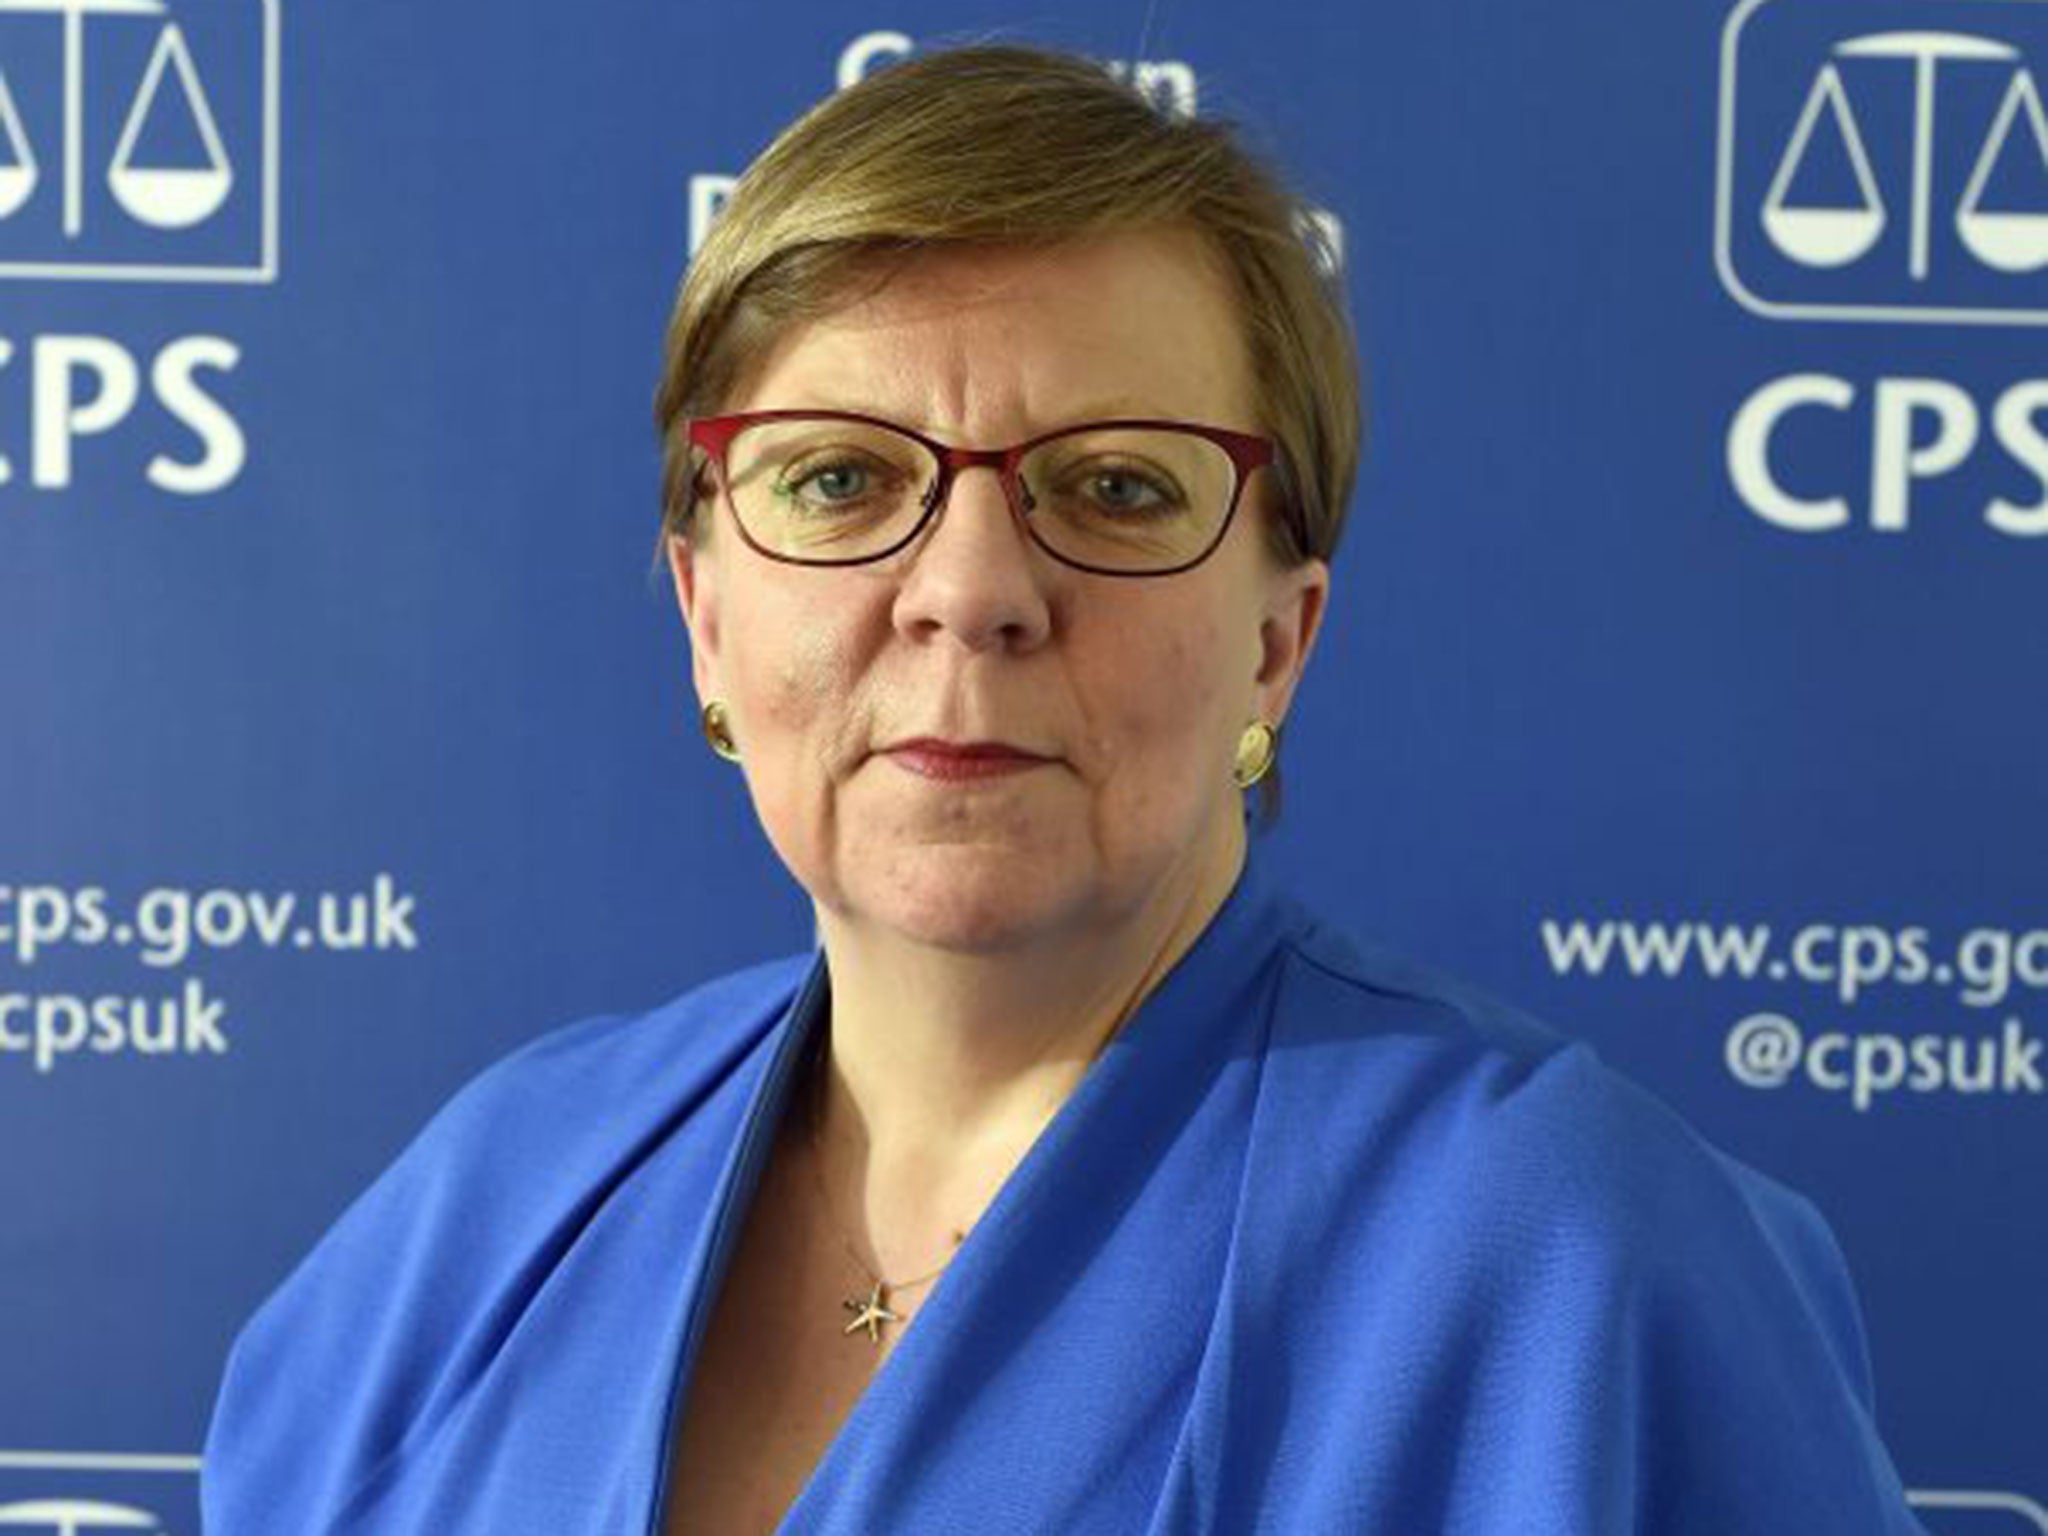 Alison Saunders said the missed opportunities were a 'matter of sincere regret'